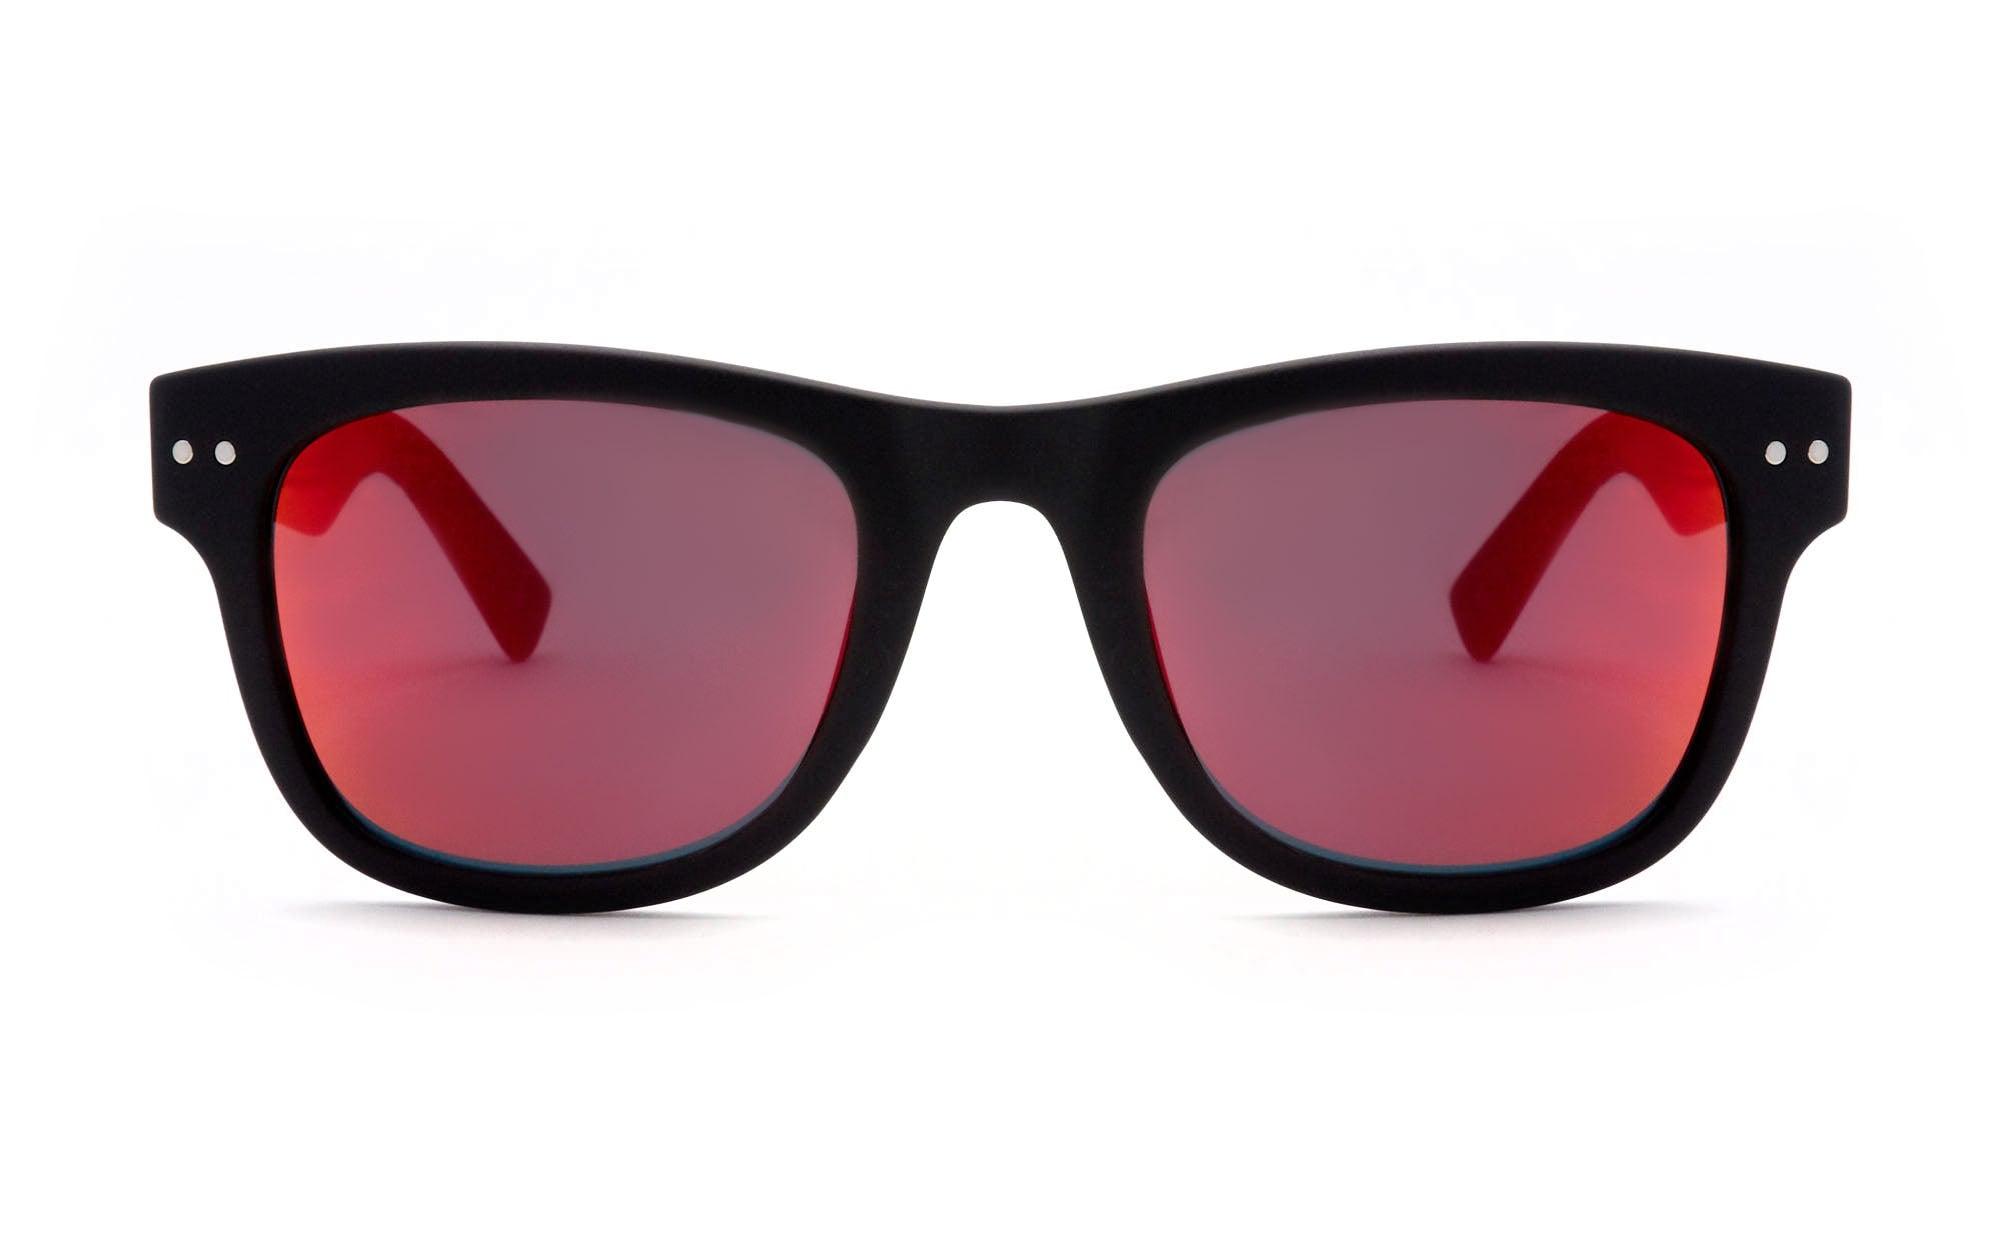 vulk nyc mblk red - Opticas Lookout